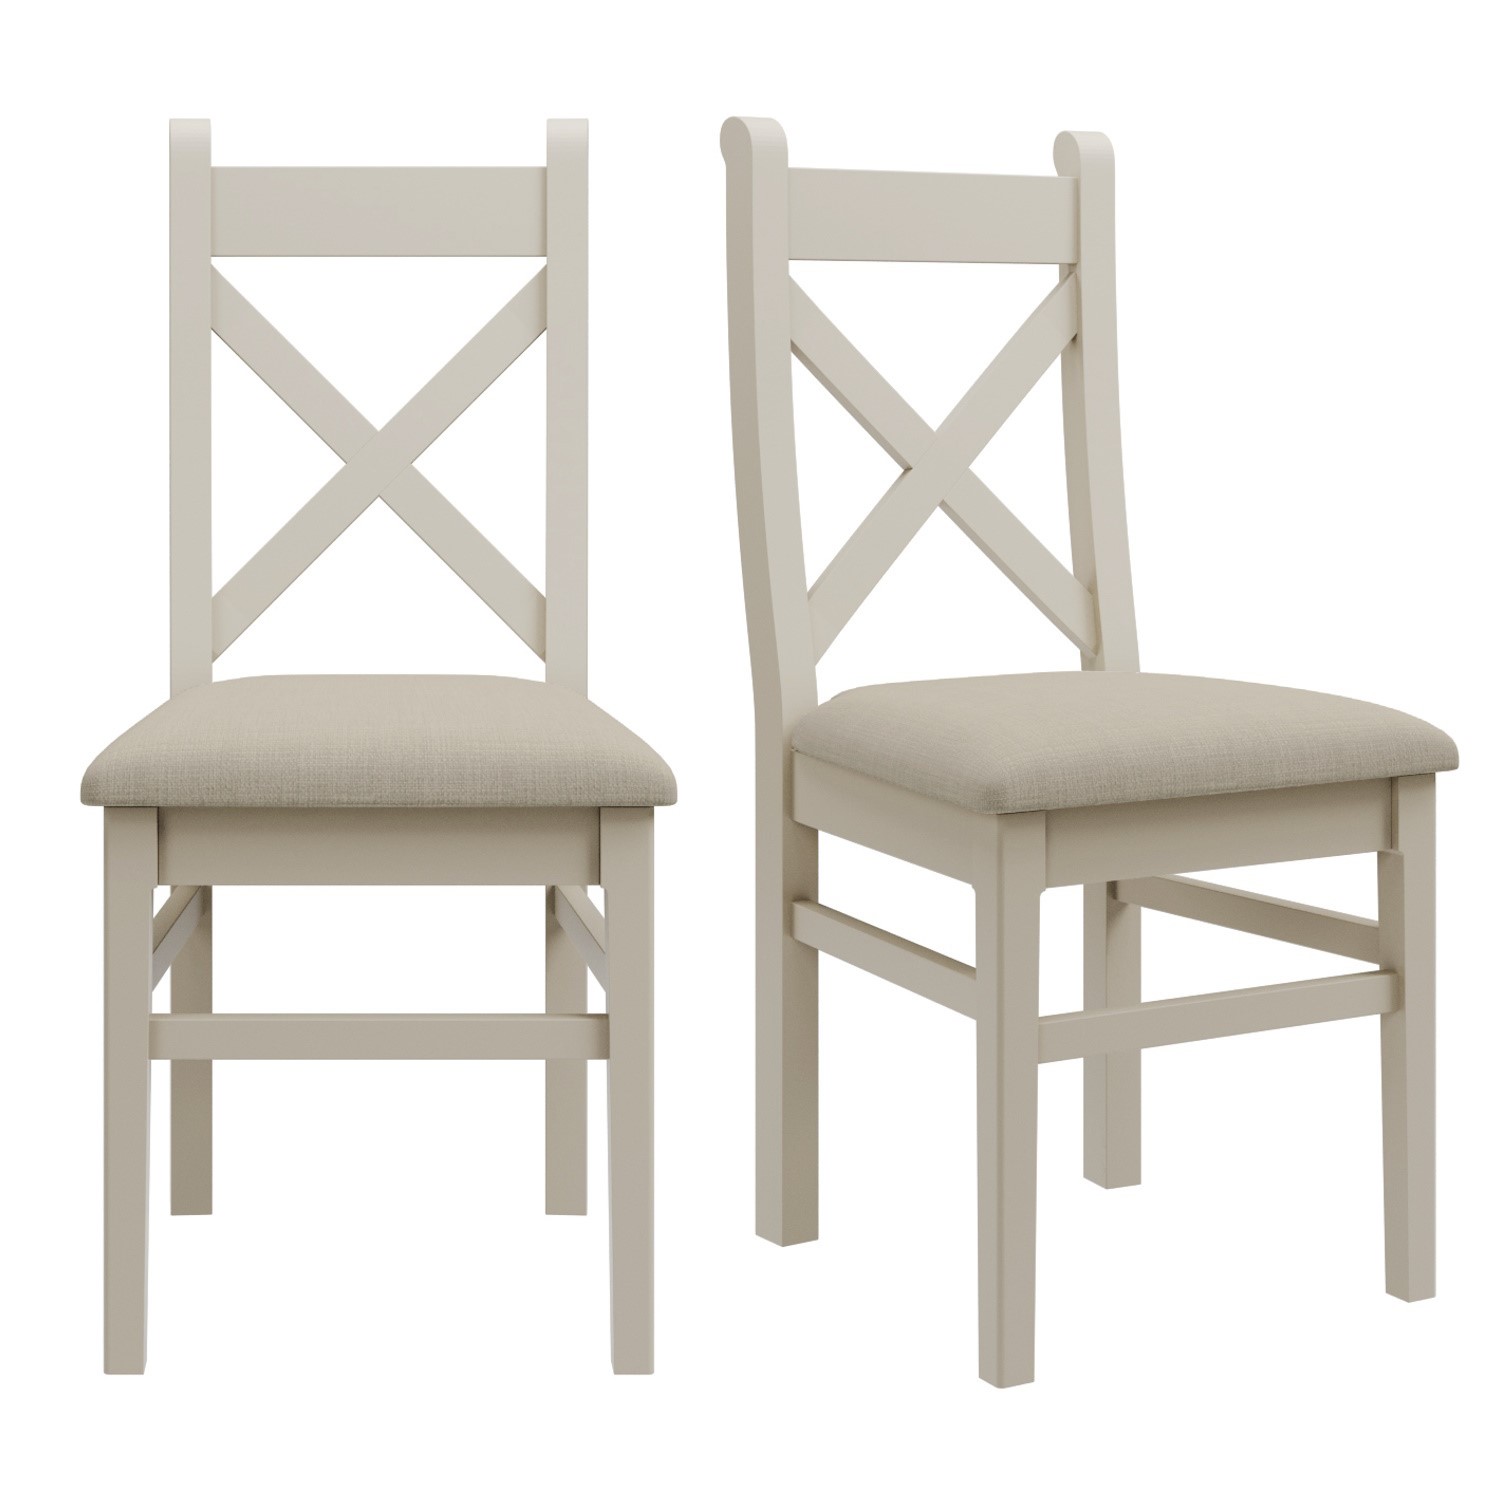 Pair Of Grey Paint Finish Dining Chairs With Fabric Seats Adeline Furniture123